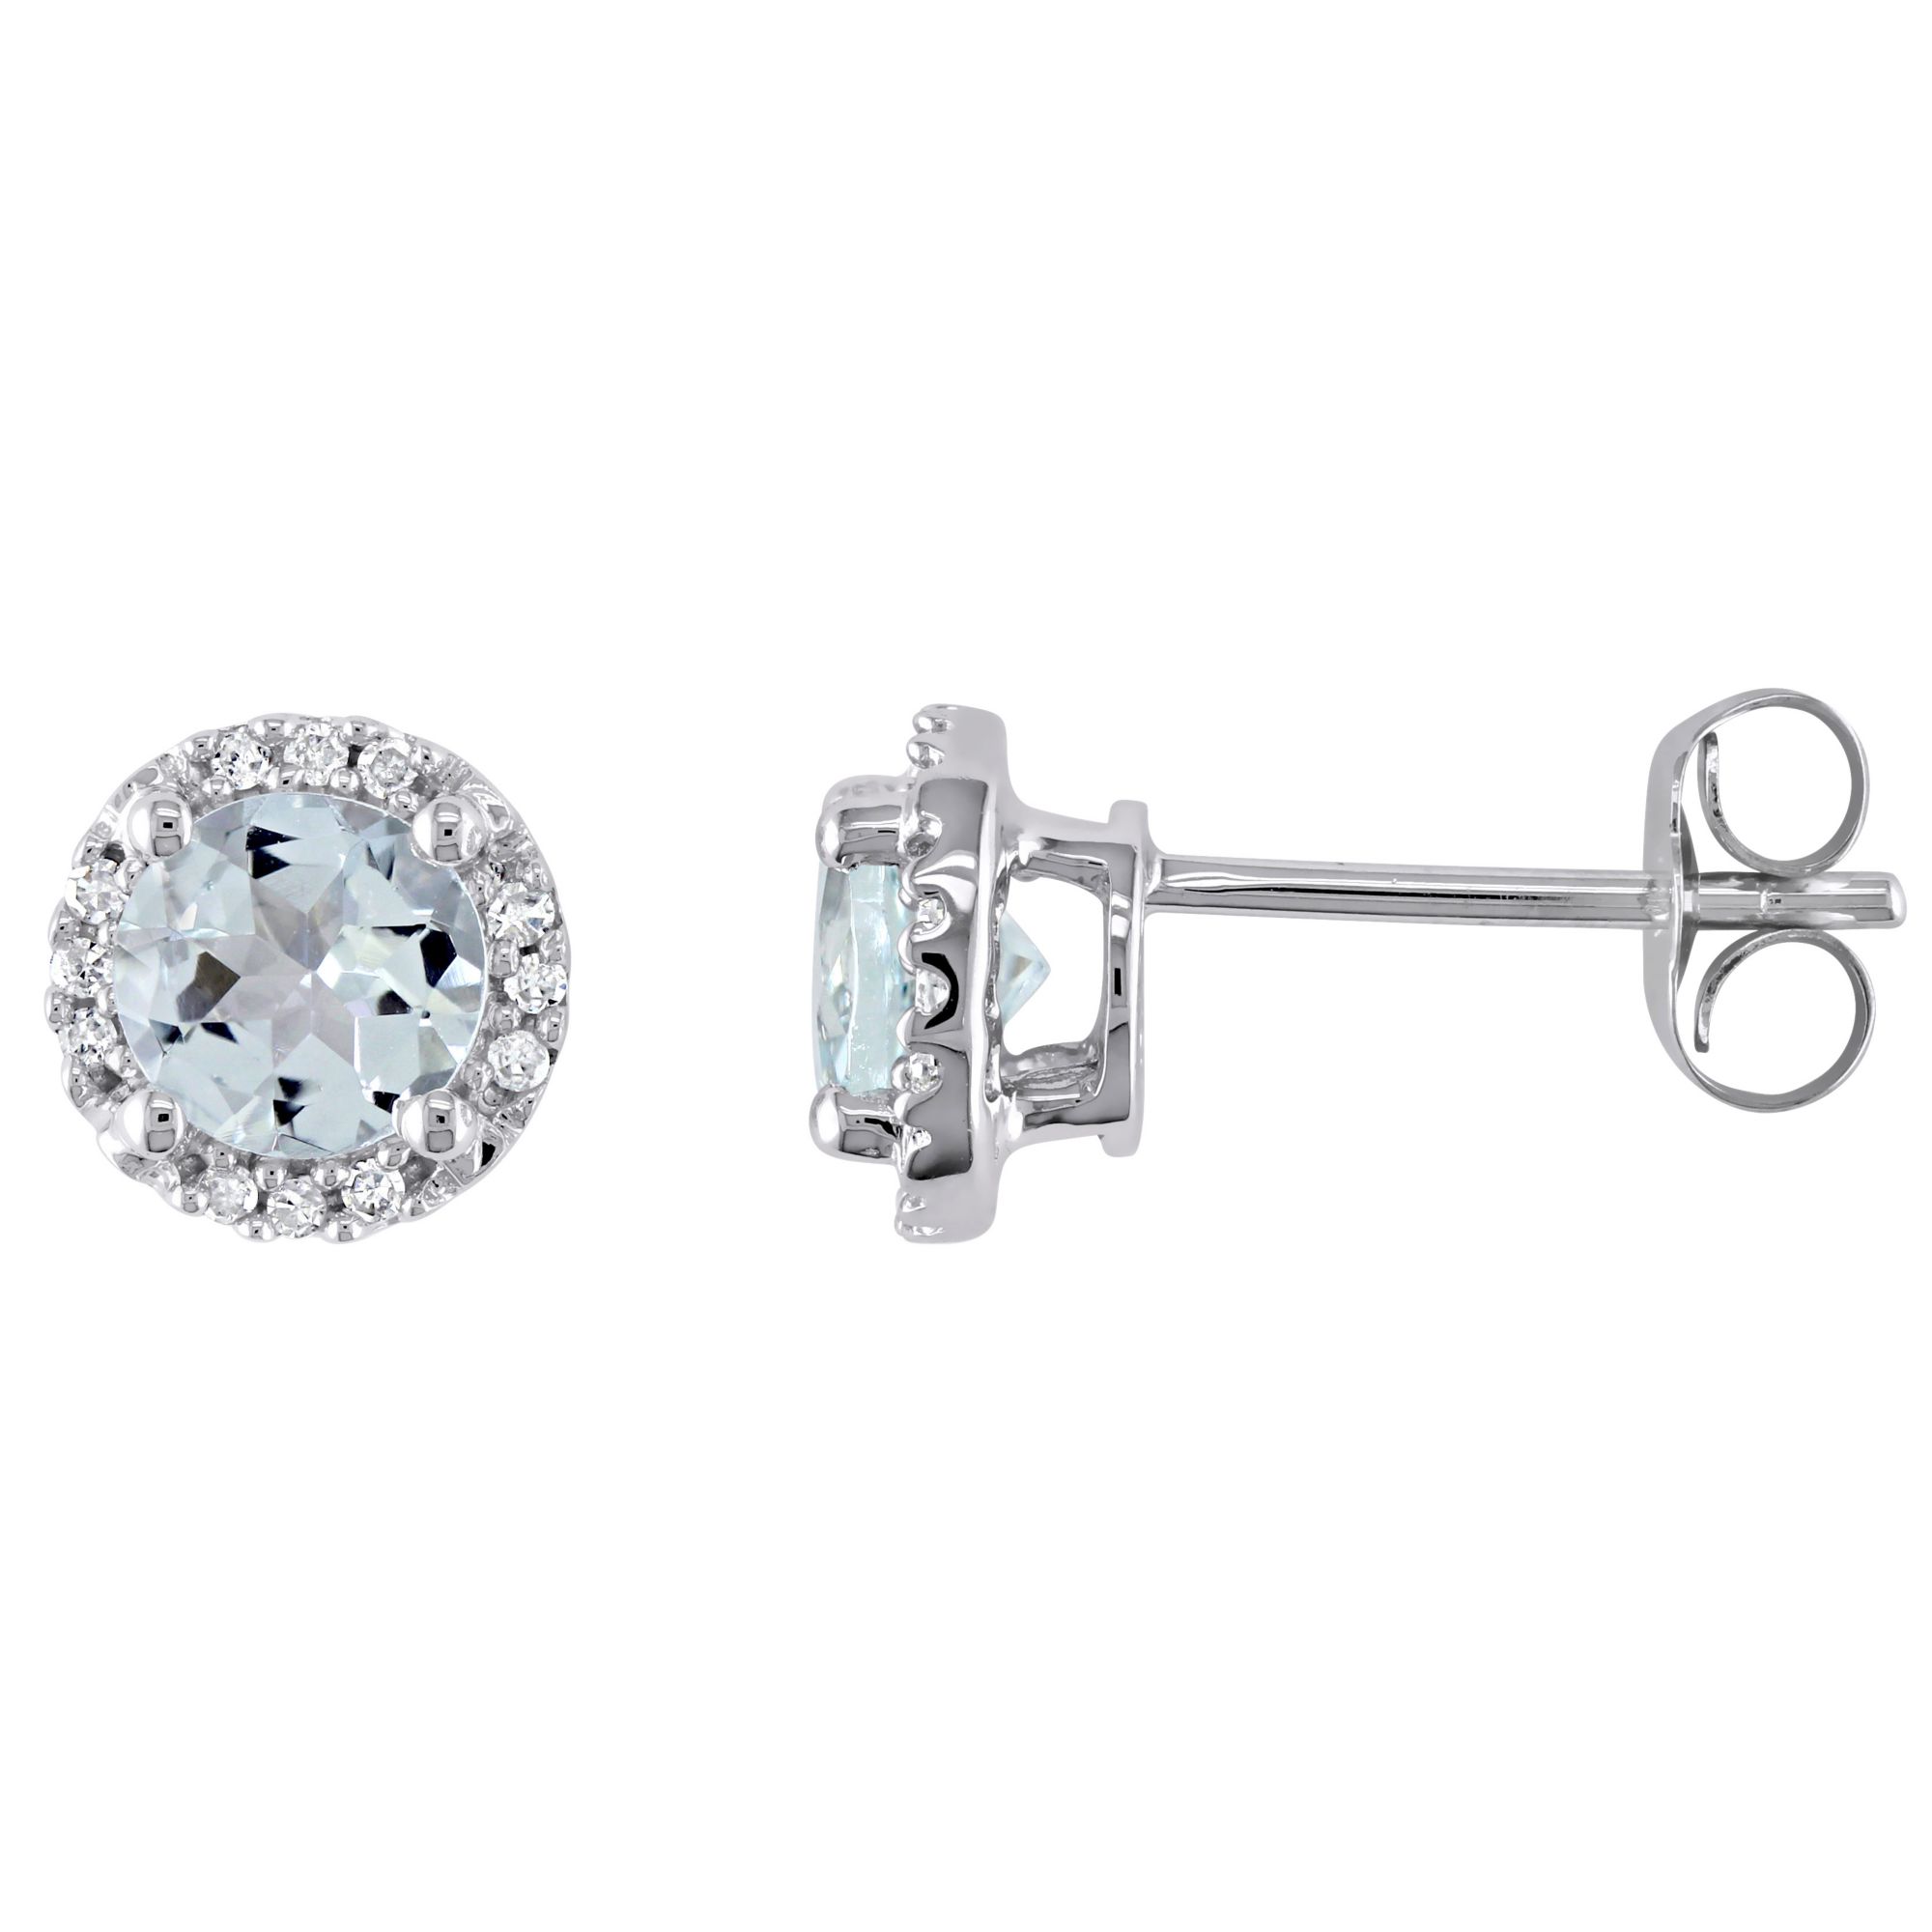 0.8 ct. t.g.w. Aquamarine and Diamond Accent Halo Stud Earrings in 10k White Gold